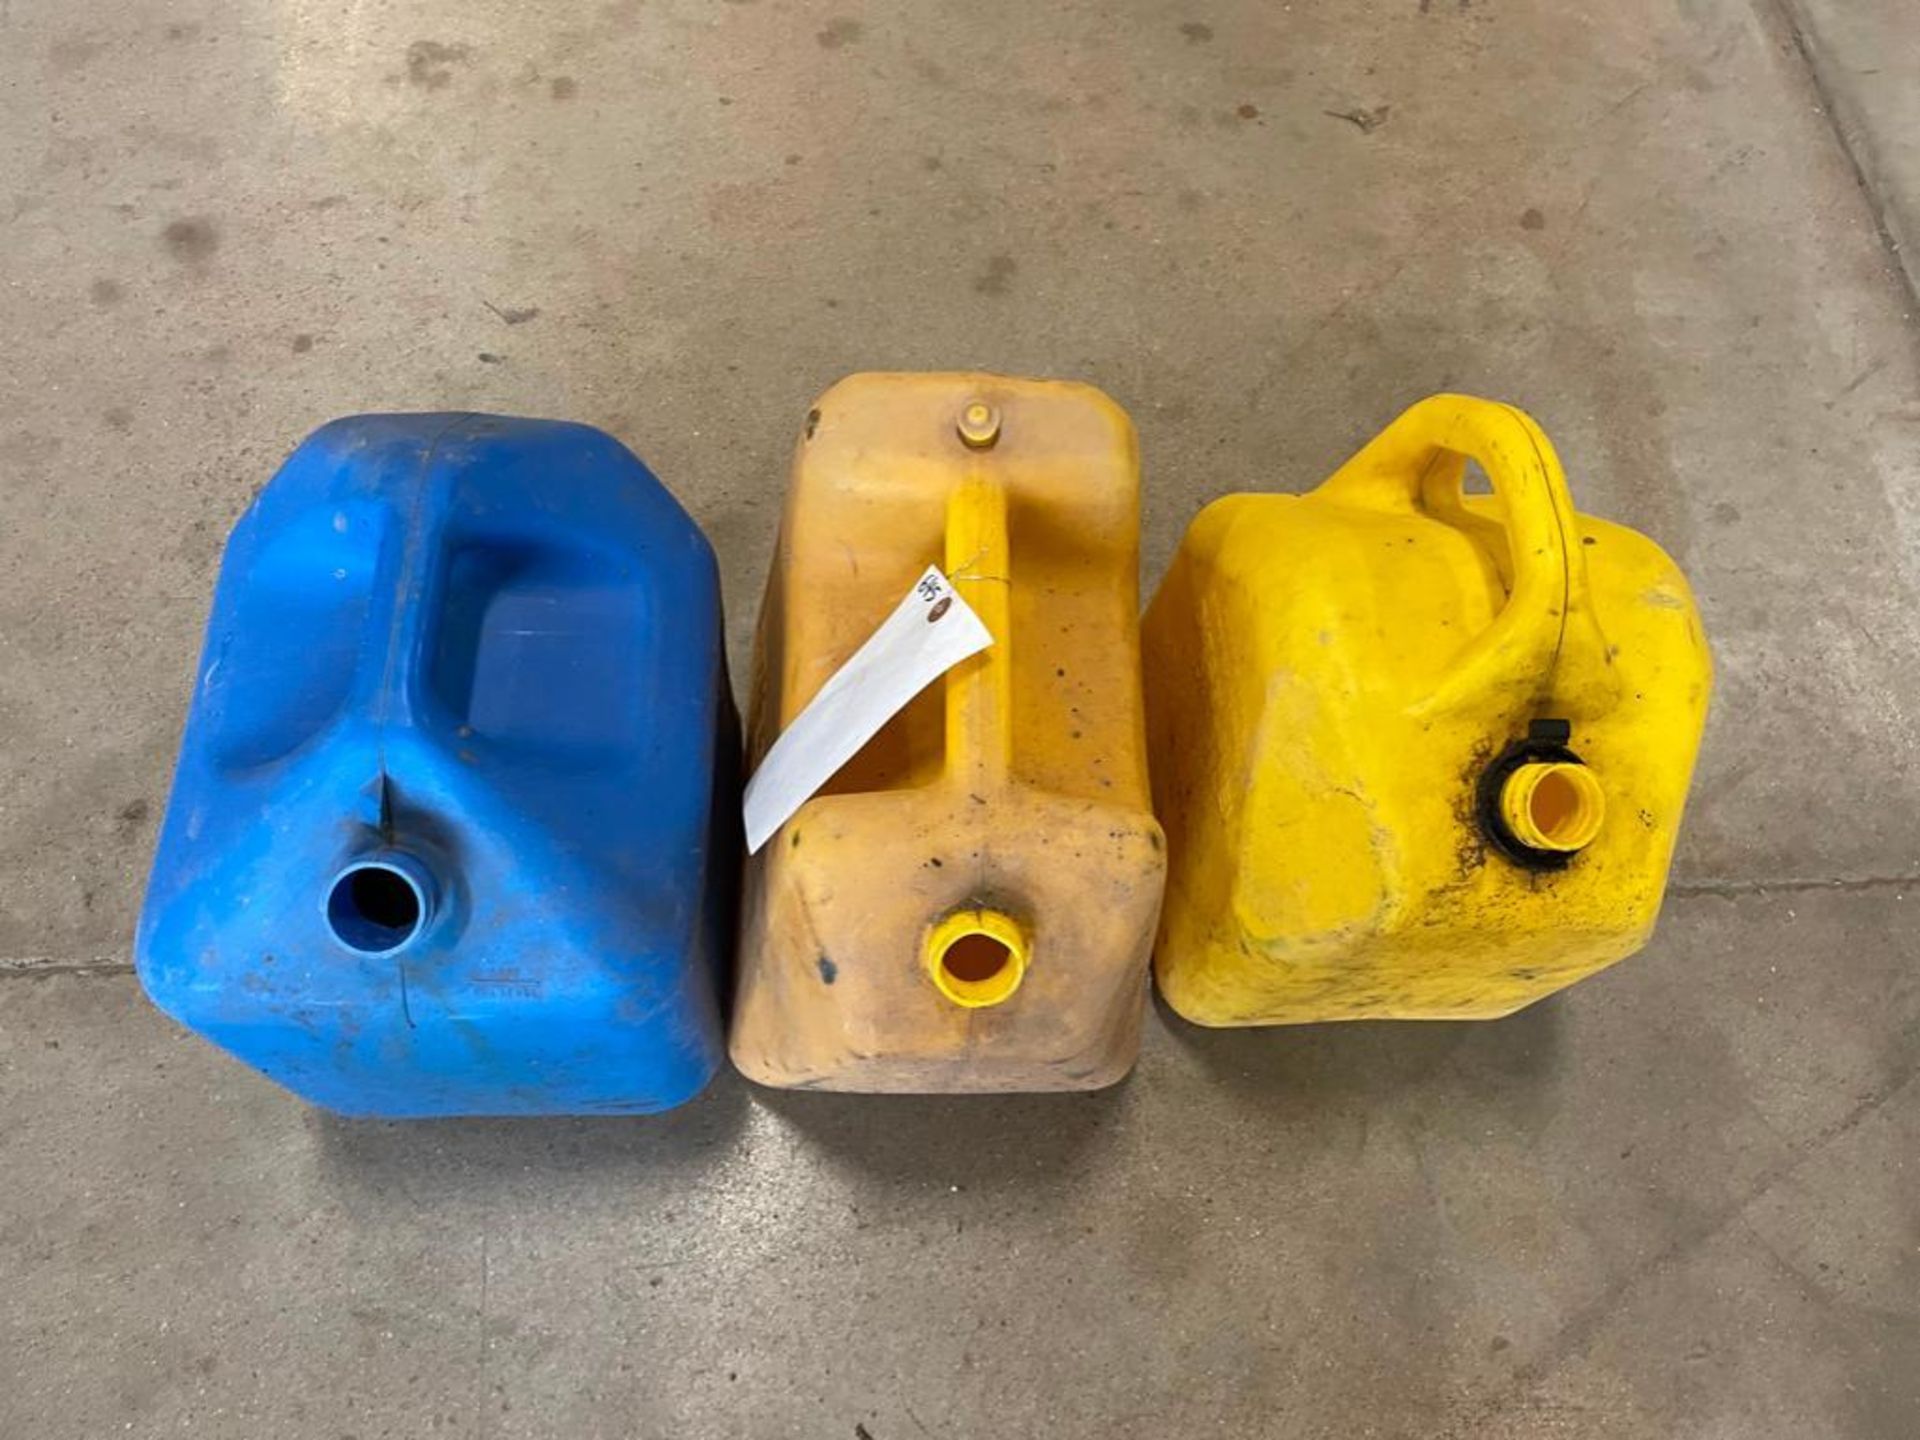 Miscellaneous Plastic Gas Cans. Located in Hazelwood, MO